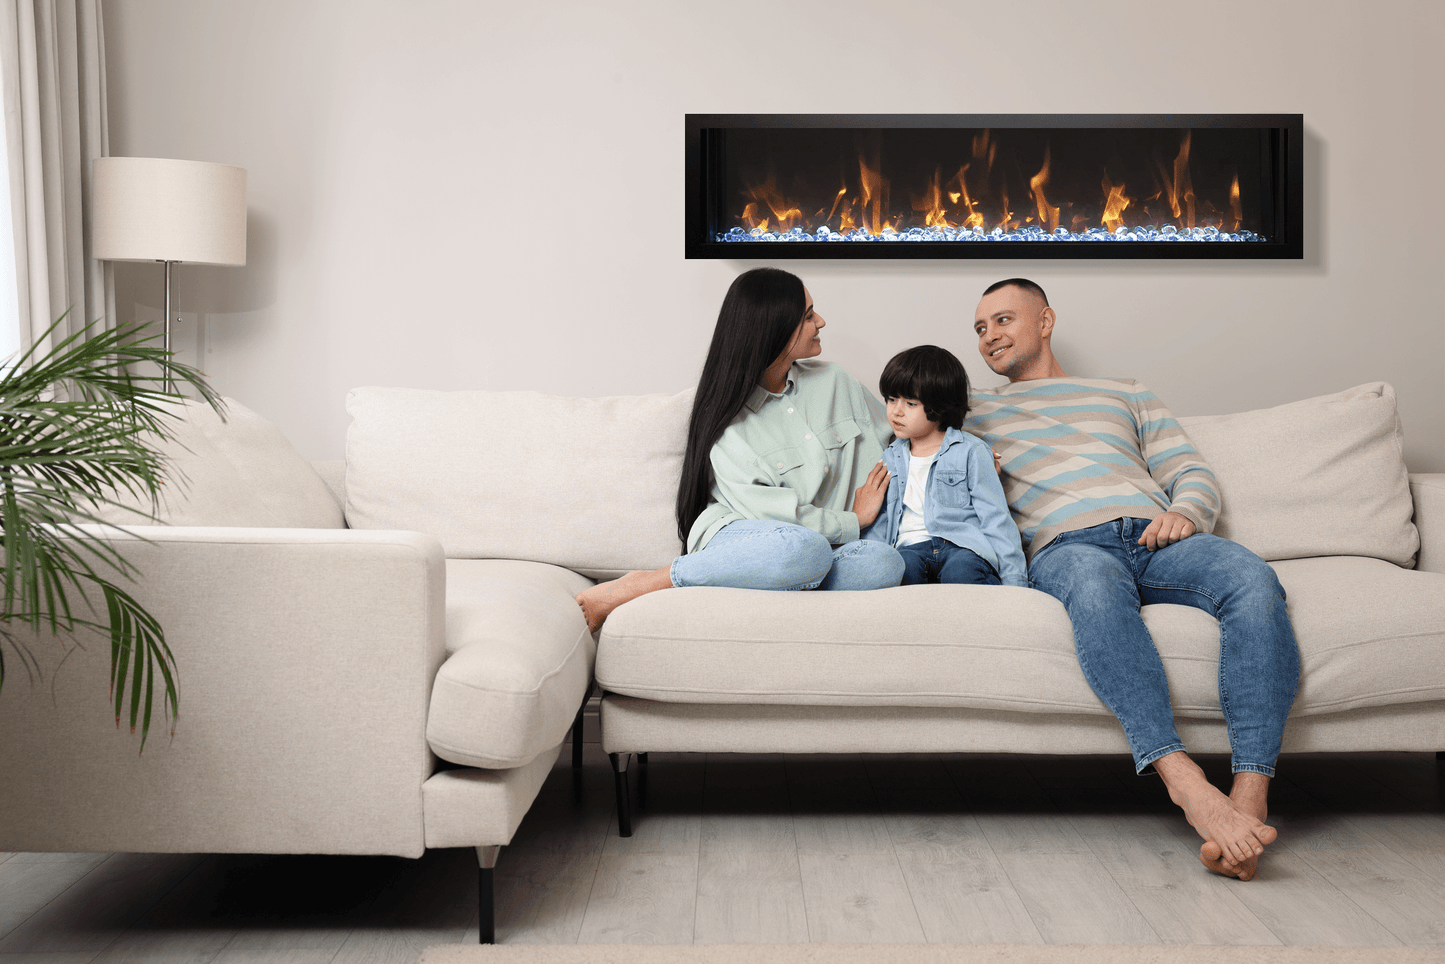 Panorama BI Slim Smart Electric Fireplace | Amantii | Built in Surround | Buy Fireplaces Online